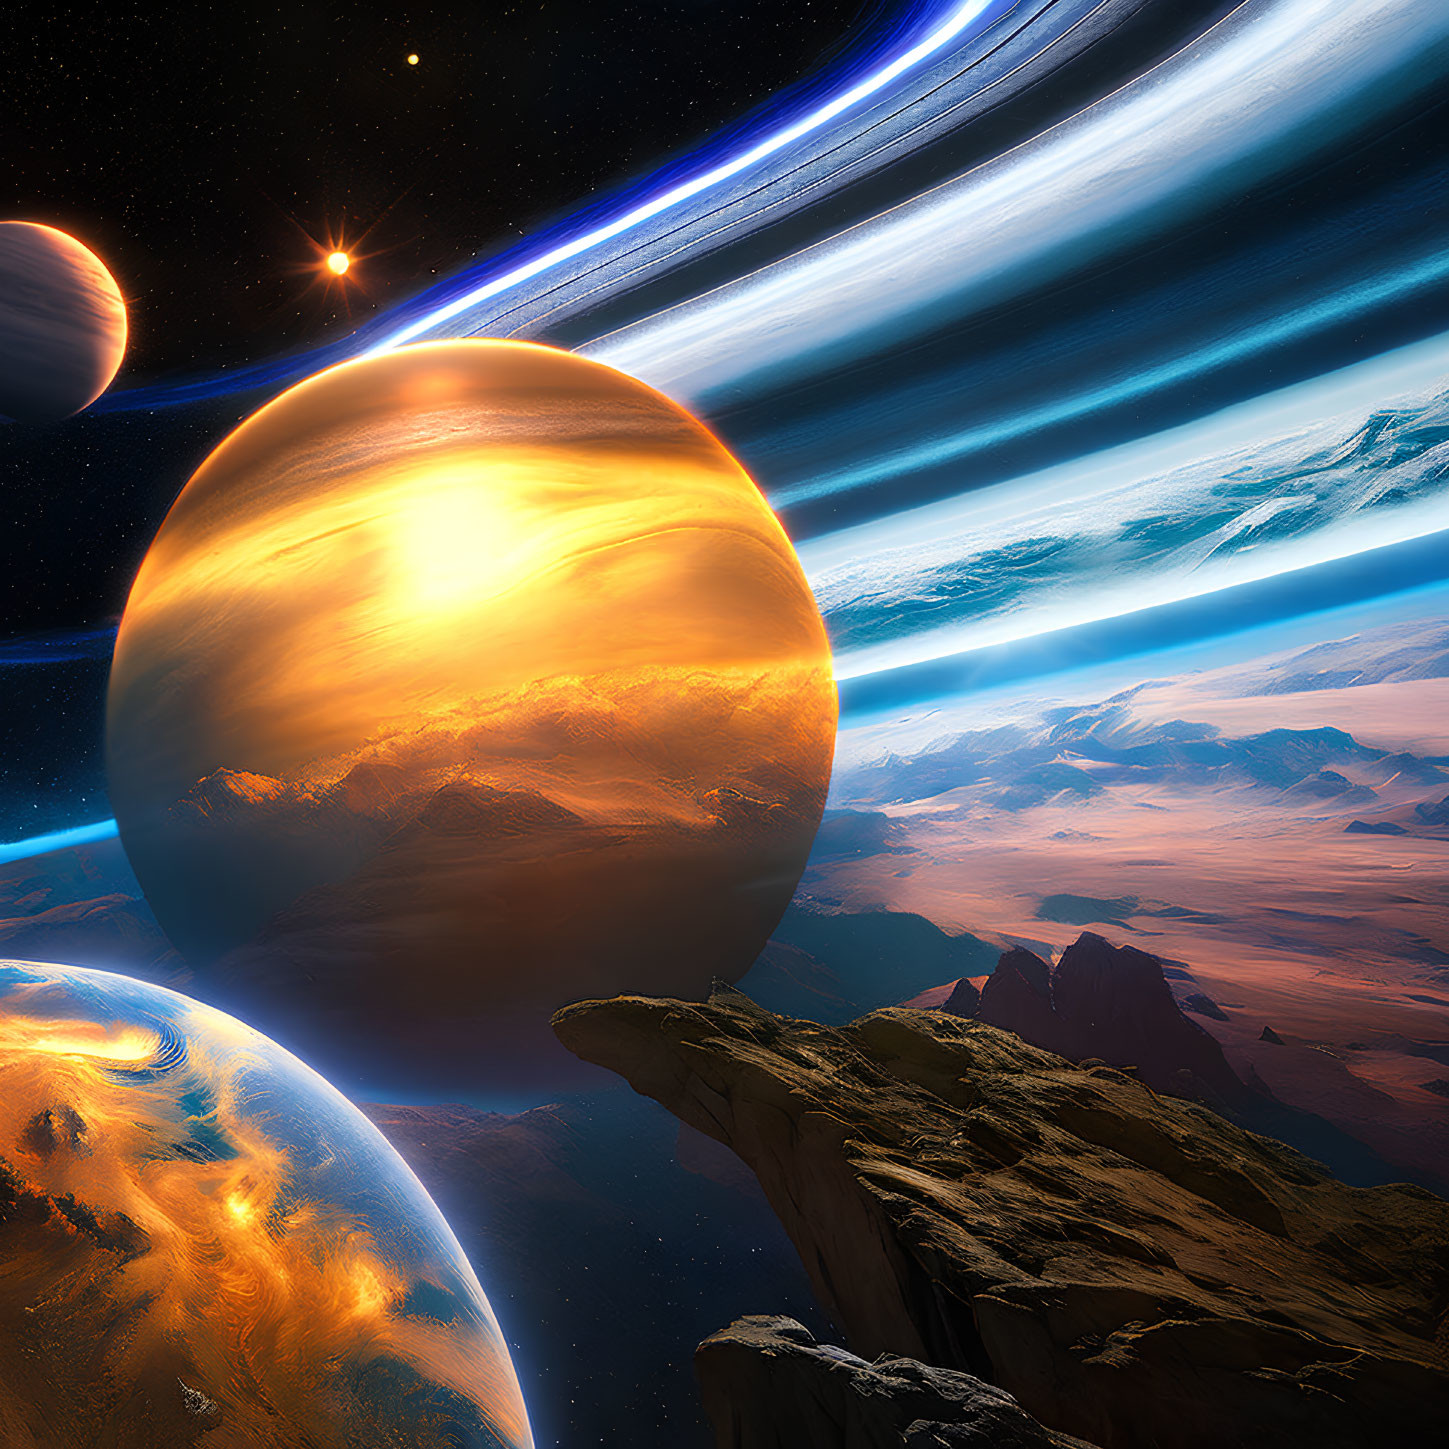 Vivid space art with rocky foreground, celestial bodies, giant planet rings, and distant star